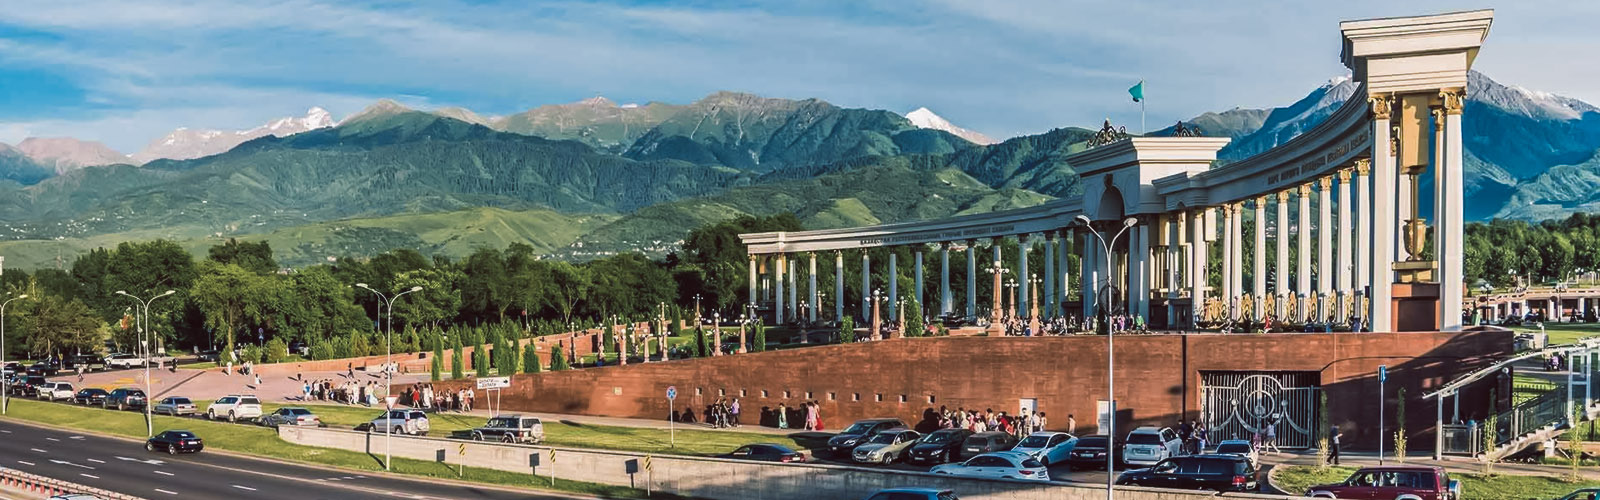 Friendly Attractions in Almaty